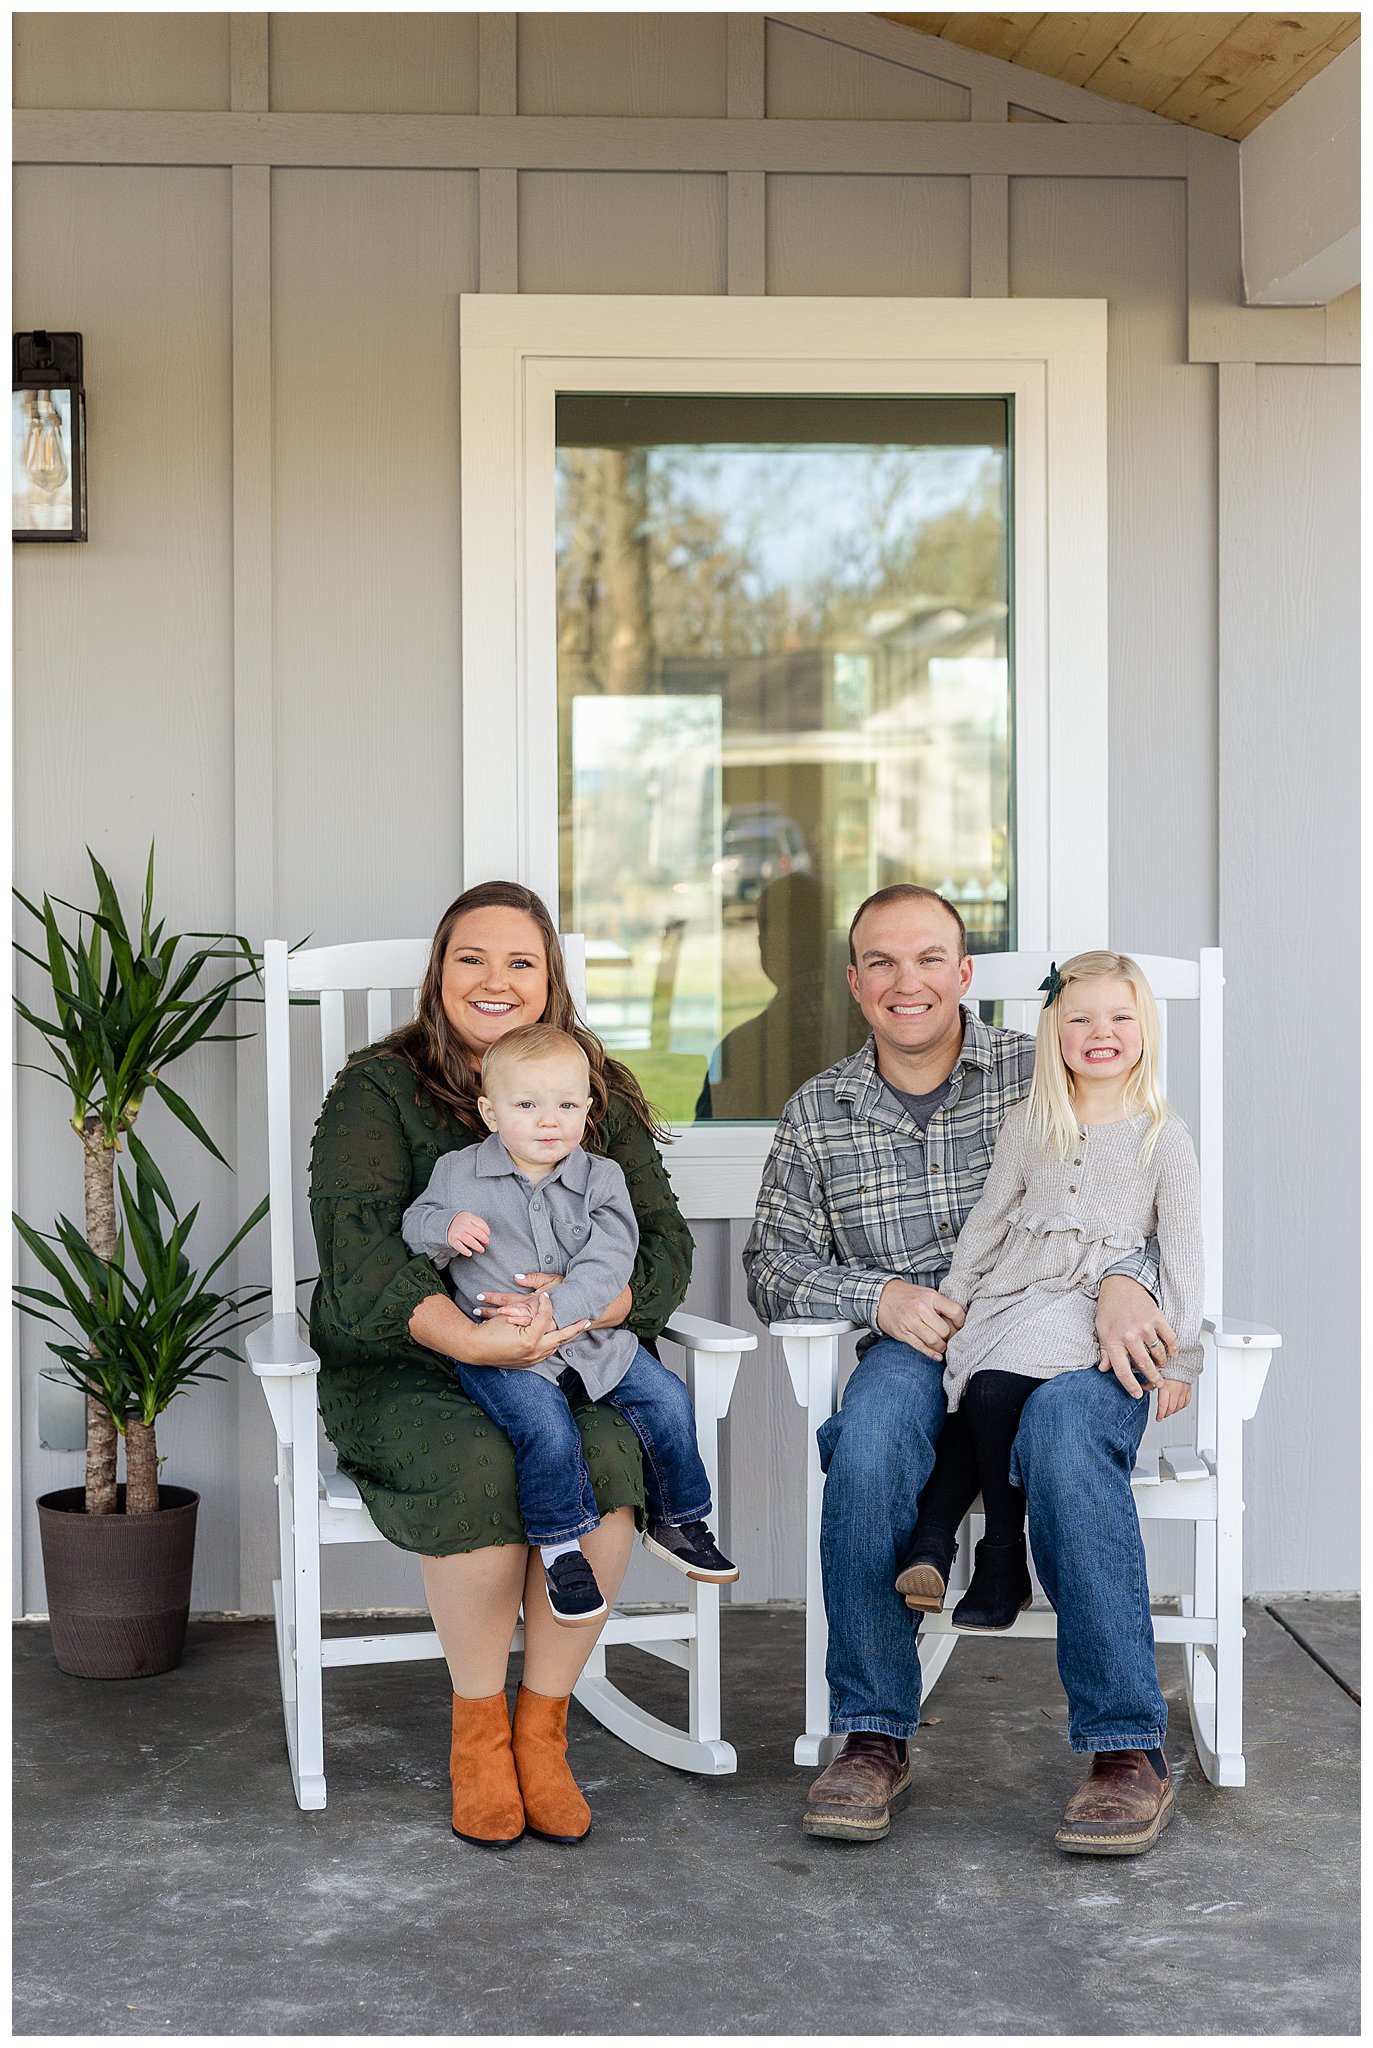 Lifestyle Family Session Redding CA New Home Renovation Kitchen Porch Master Bedroom Living Room January Winter,